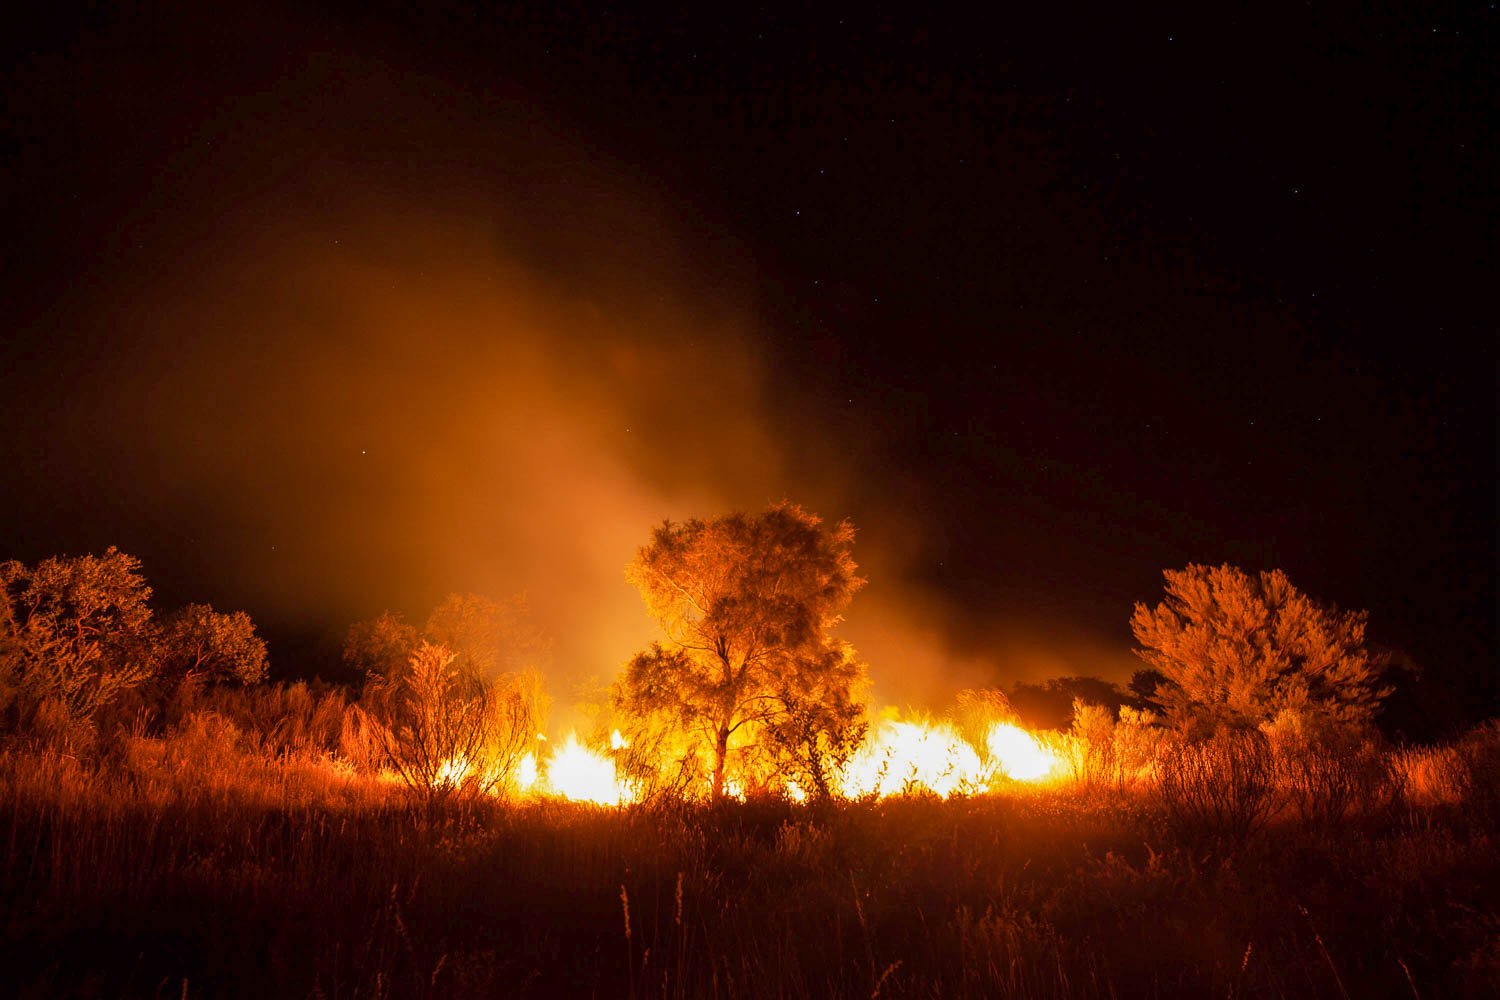 Night view of the burning forest, Wildfire, West MacDonnell Ranges - Northern Territory